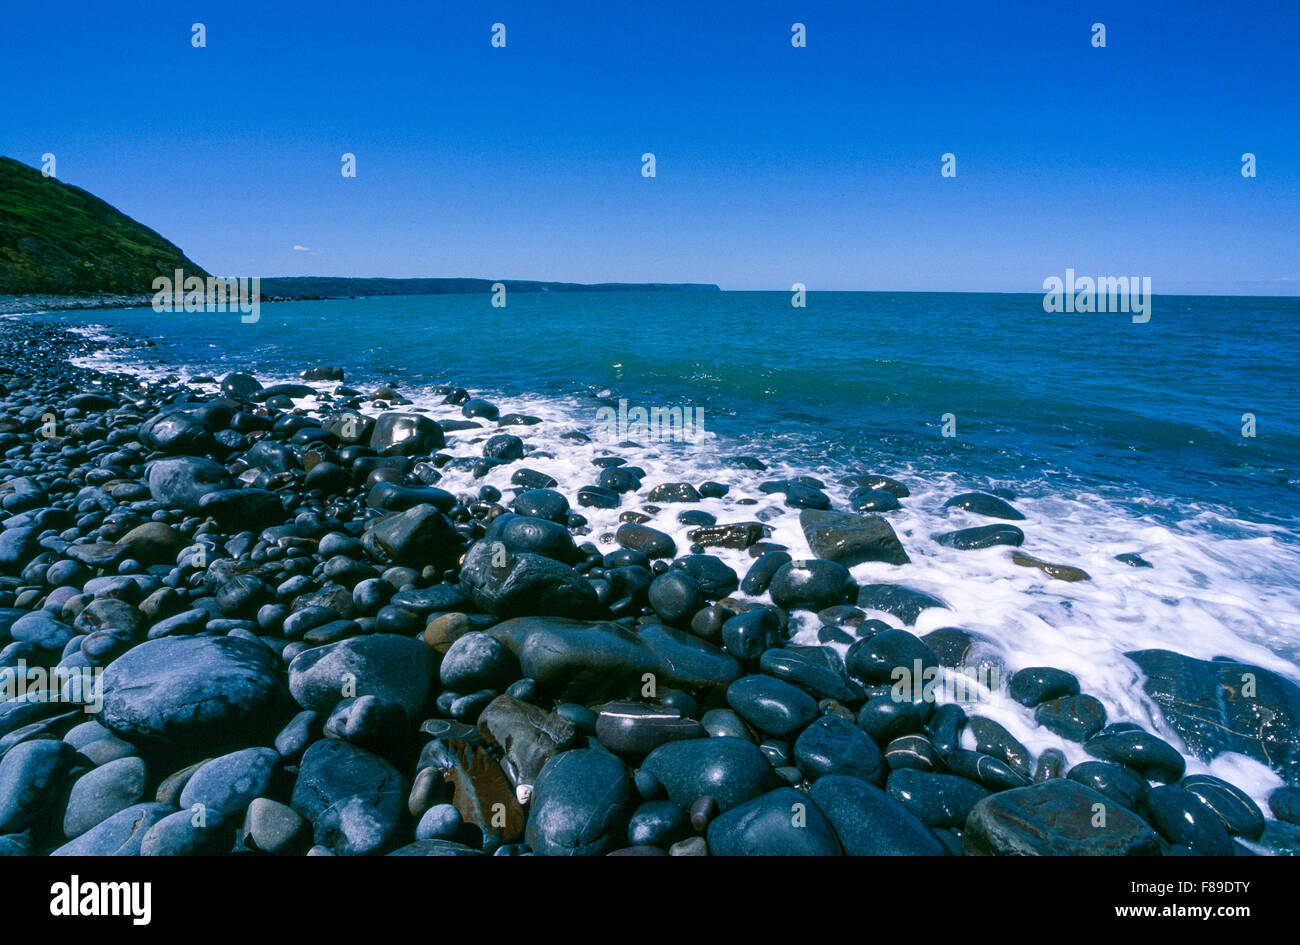 Greencliff Beach View at High Tide, Looking South West towards Bucks Mills, Devon, UK. (Velvia scan) Stock Photo